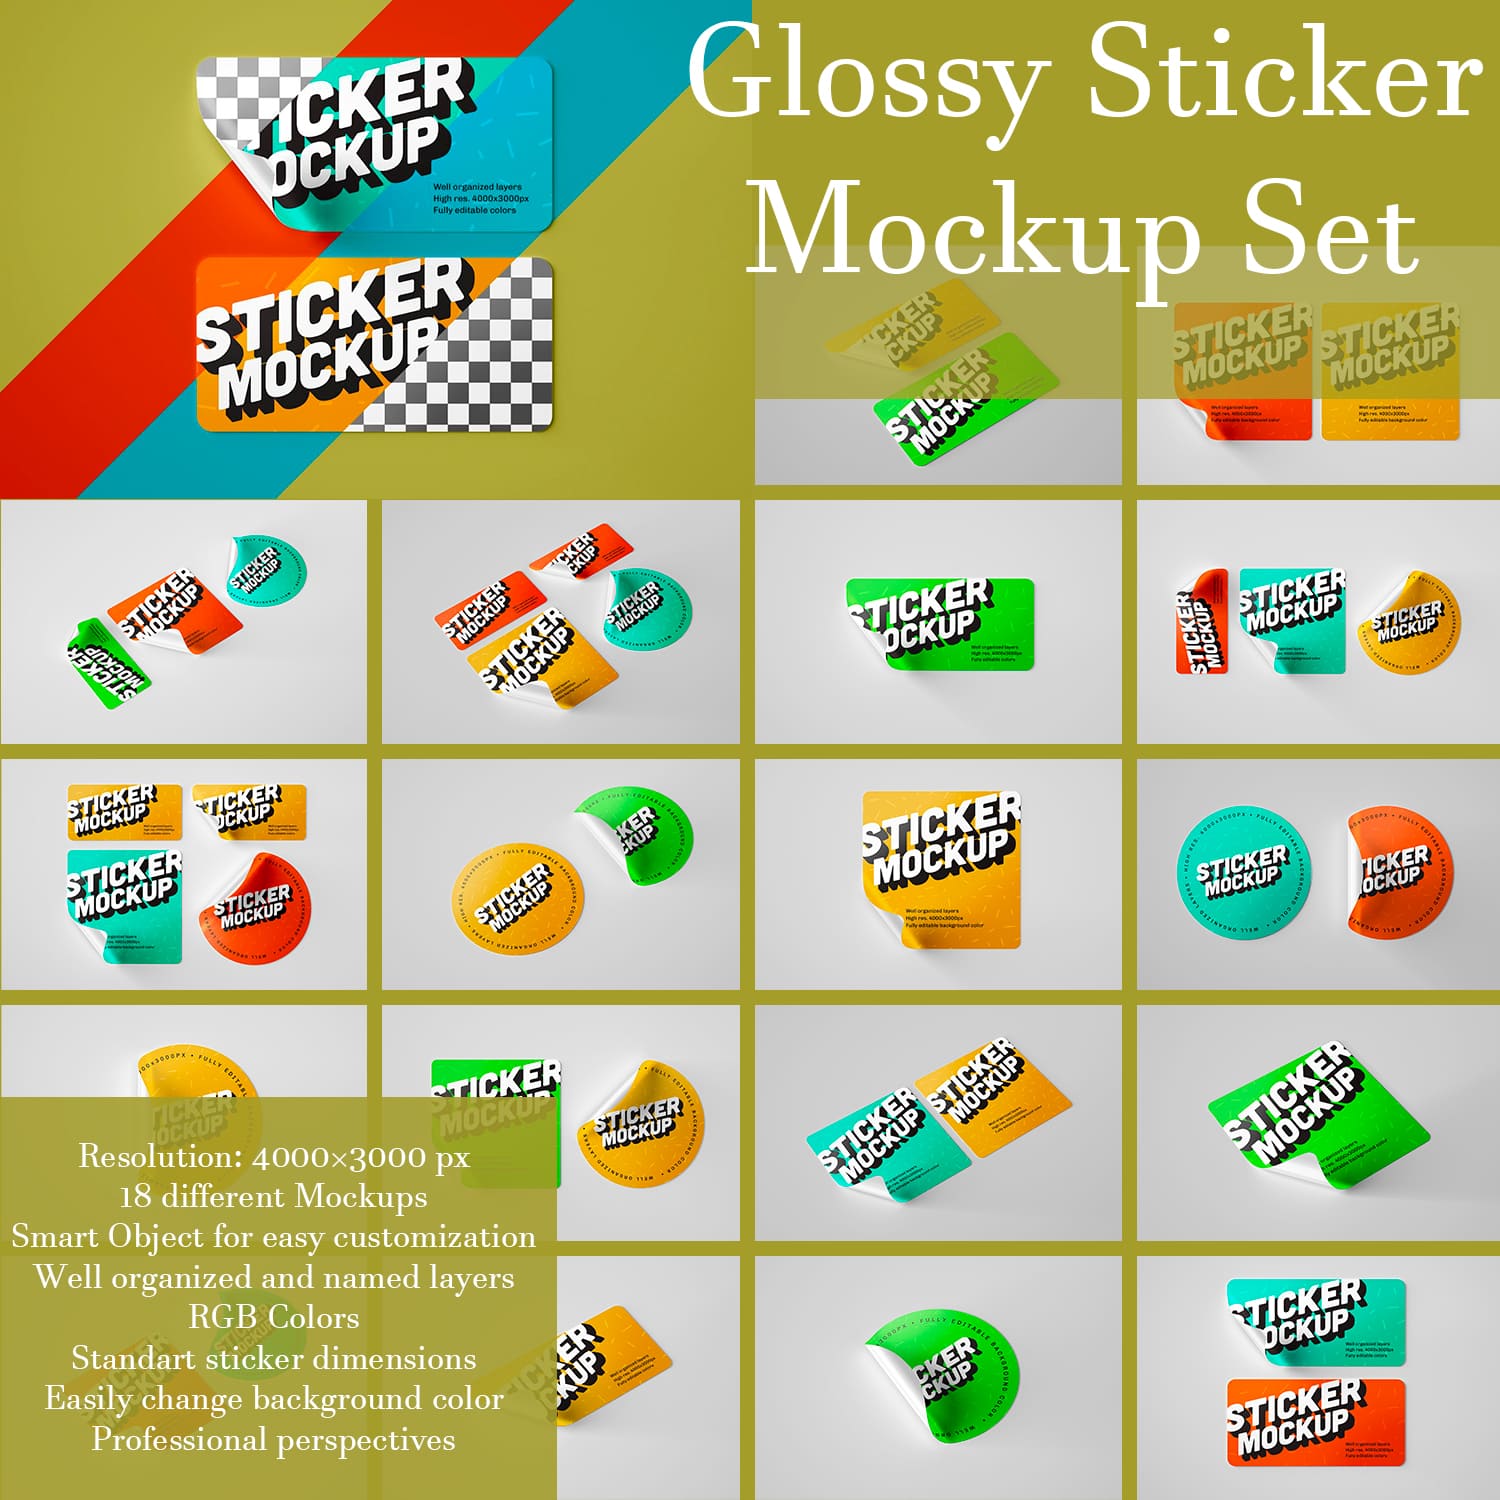 Collection of images of gorgeous glossy stickers.